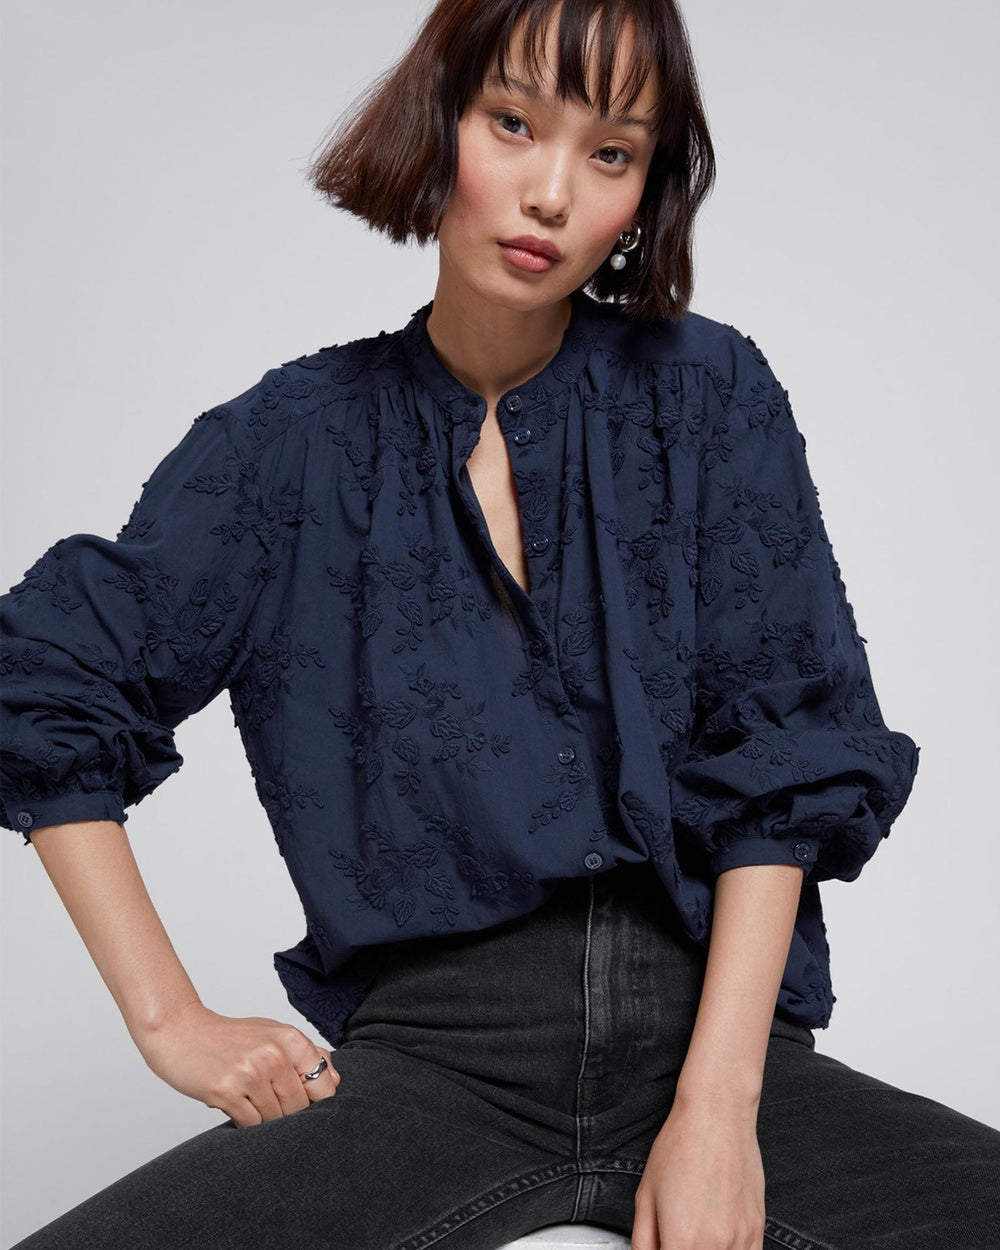 A chic blouse to dress up a pair of jeans on the weekend, a little bit of luxury.